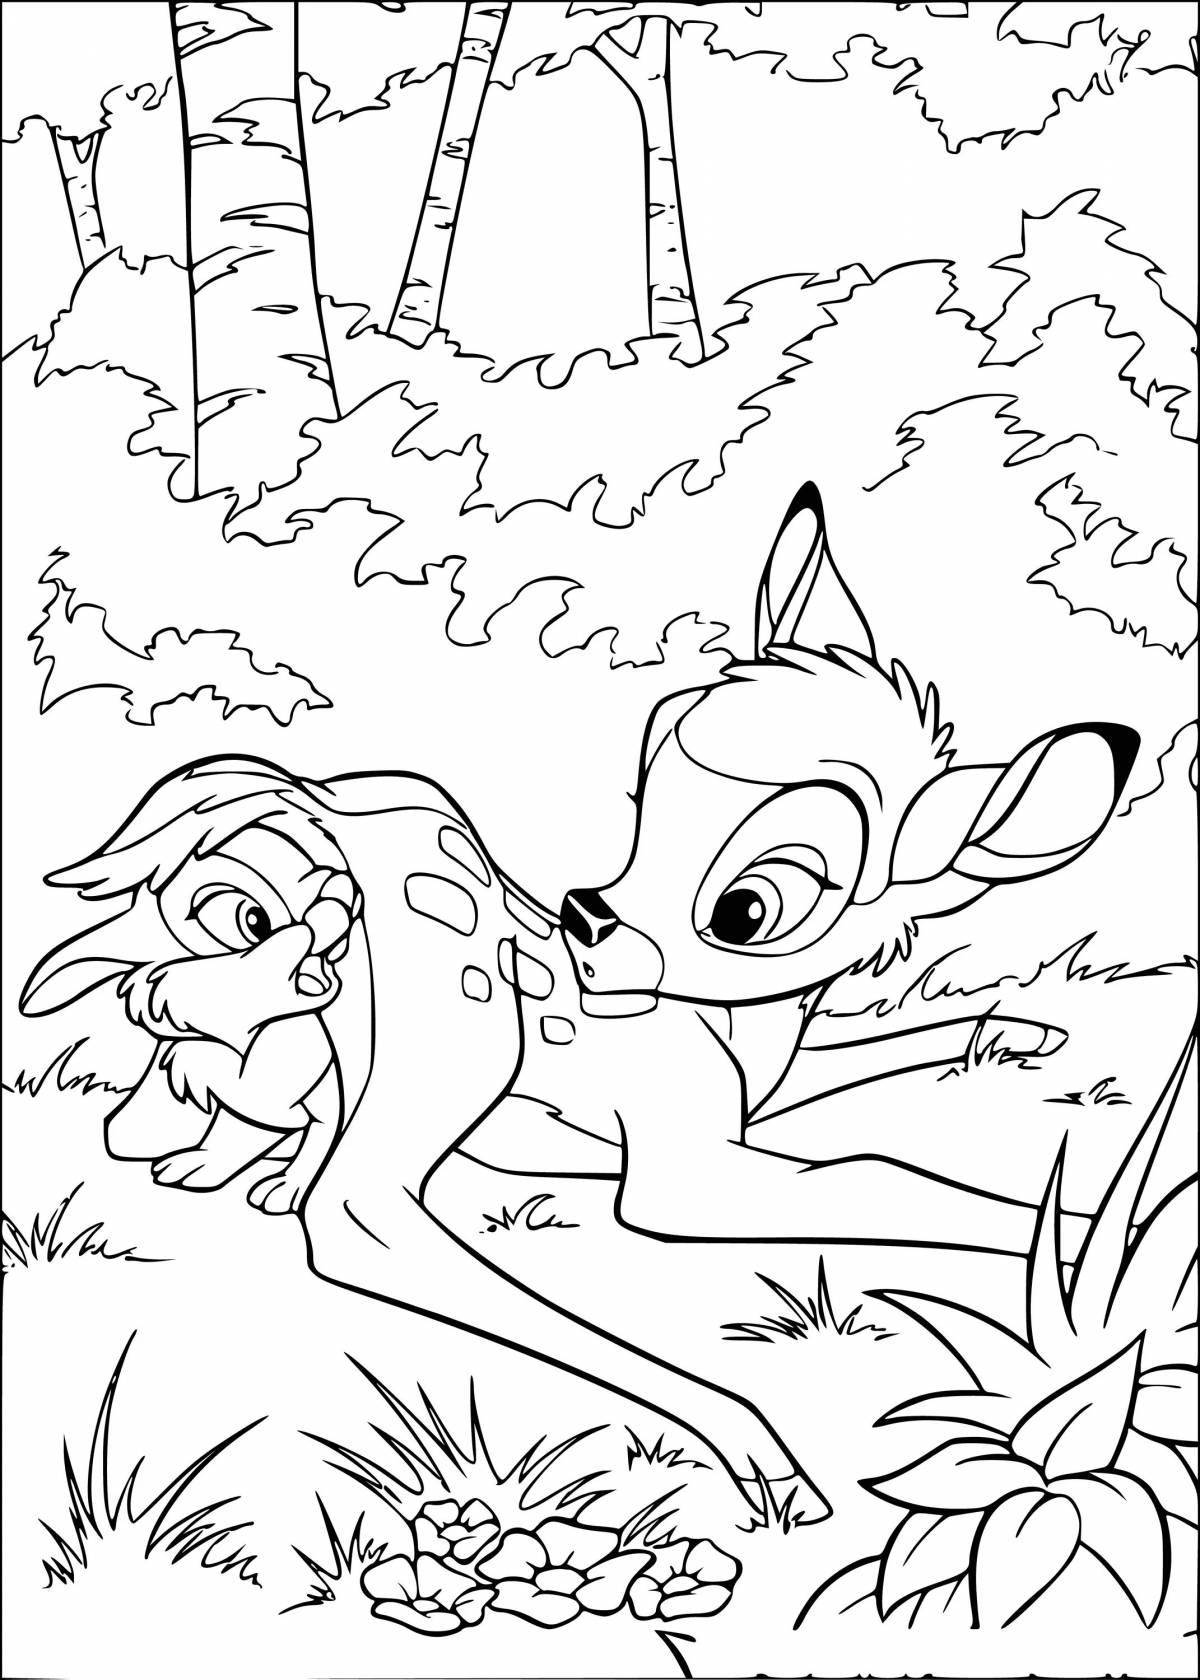 Radiant bambi fawn coloring page